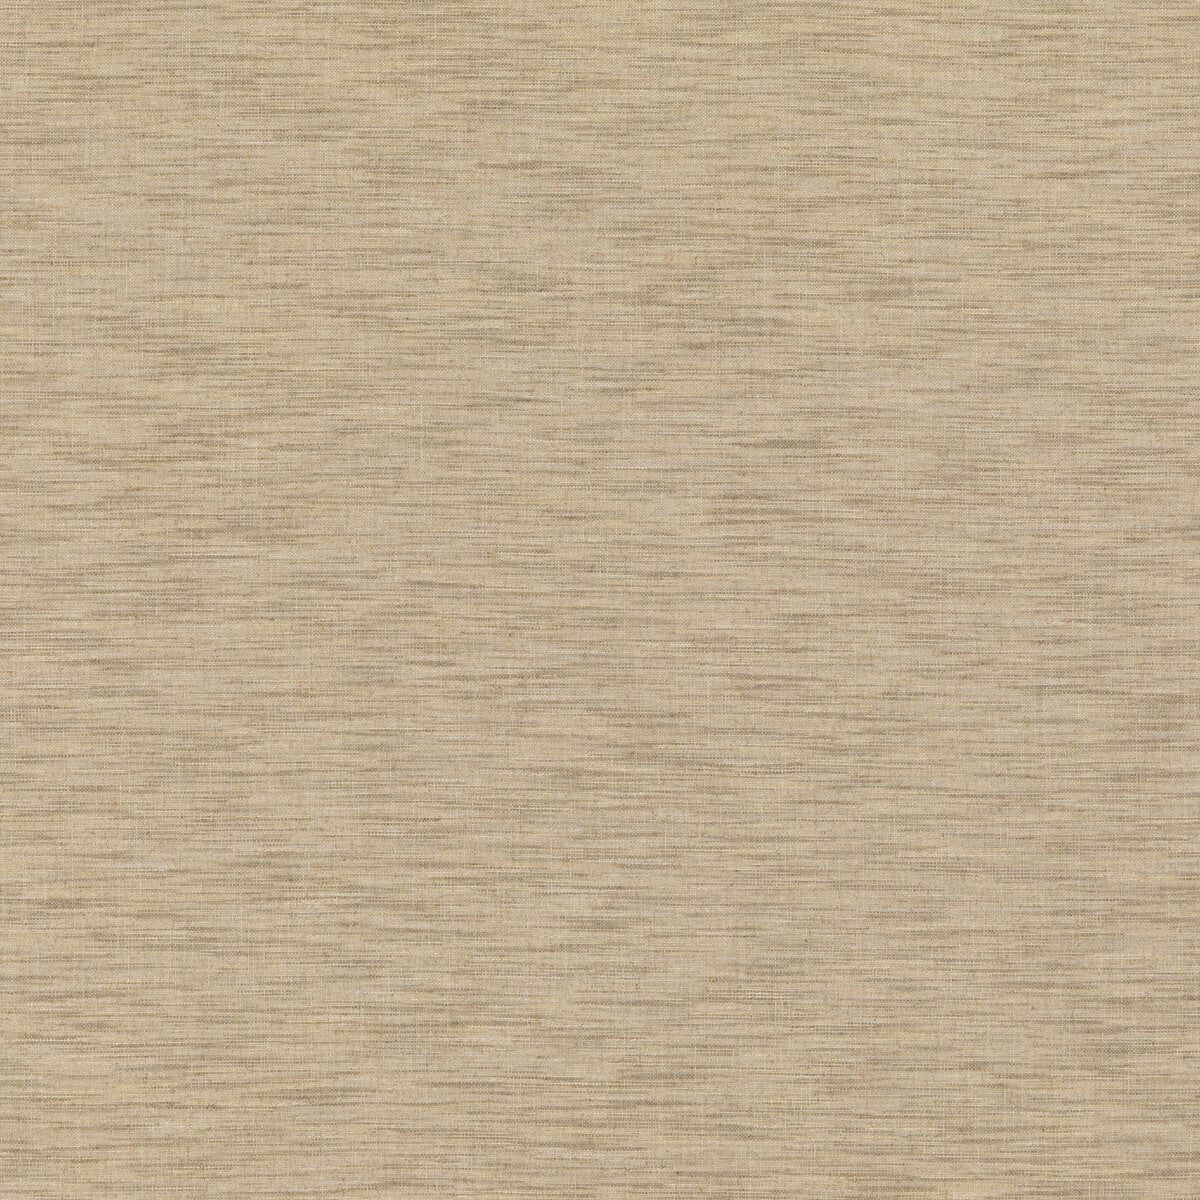 Quinton fabric in sand color - pattern BF10887.130.0 - by G P &amp; J Baker in the Essential Colours II collection